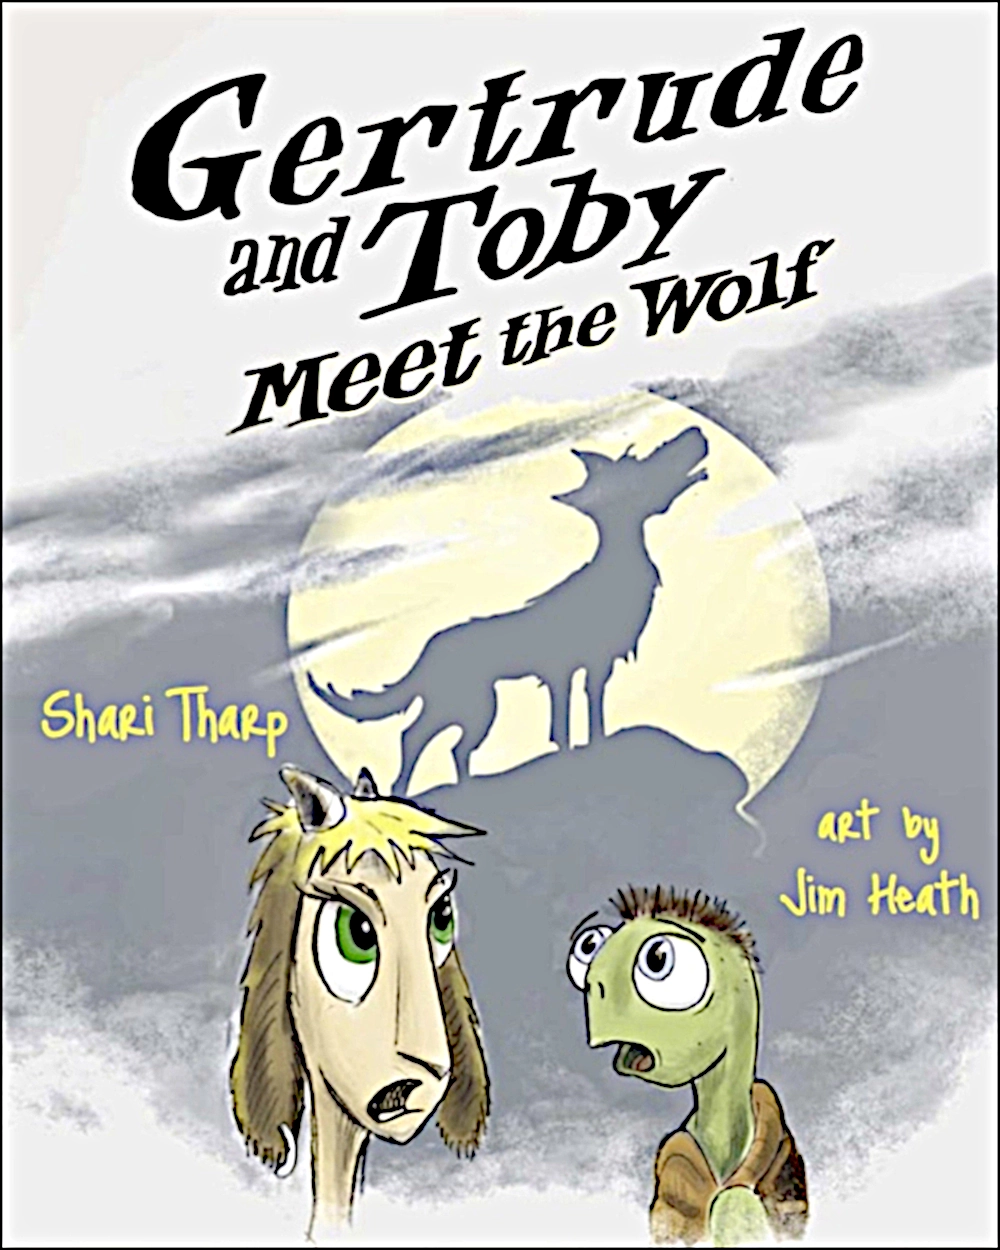 Cover image of Gertrude and Toby Meet the Wolf, book 3 in the three-book Gertrude and Toby Adventure Series.